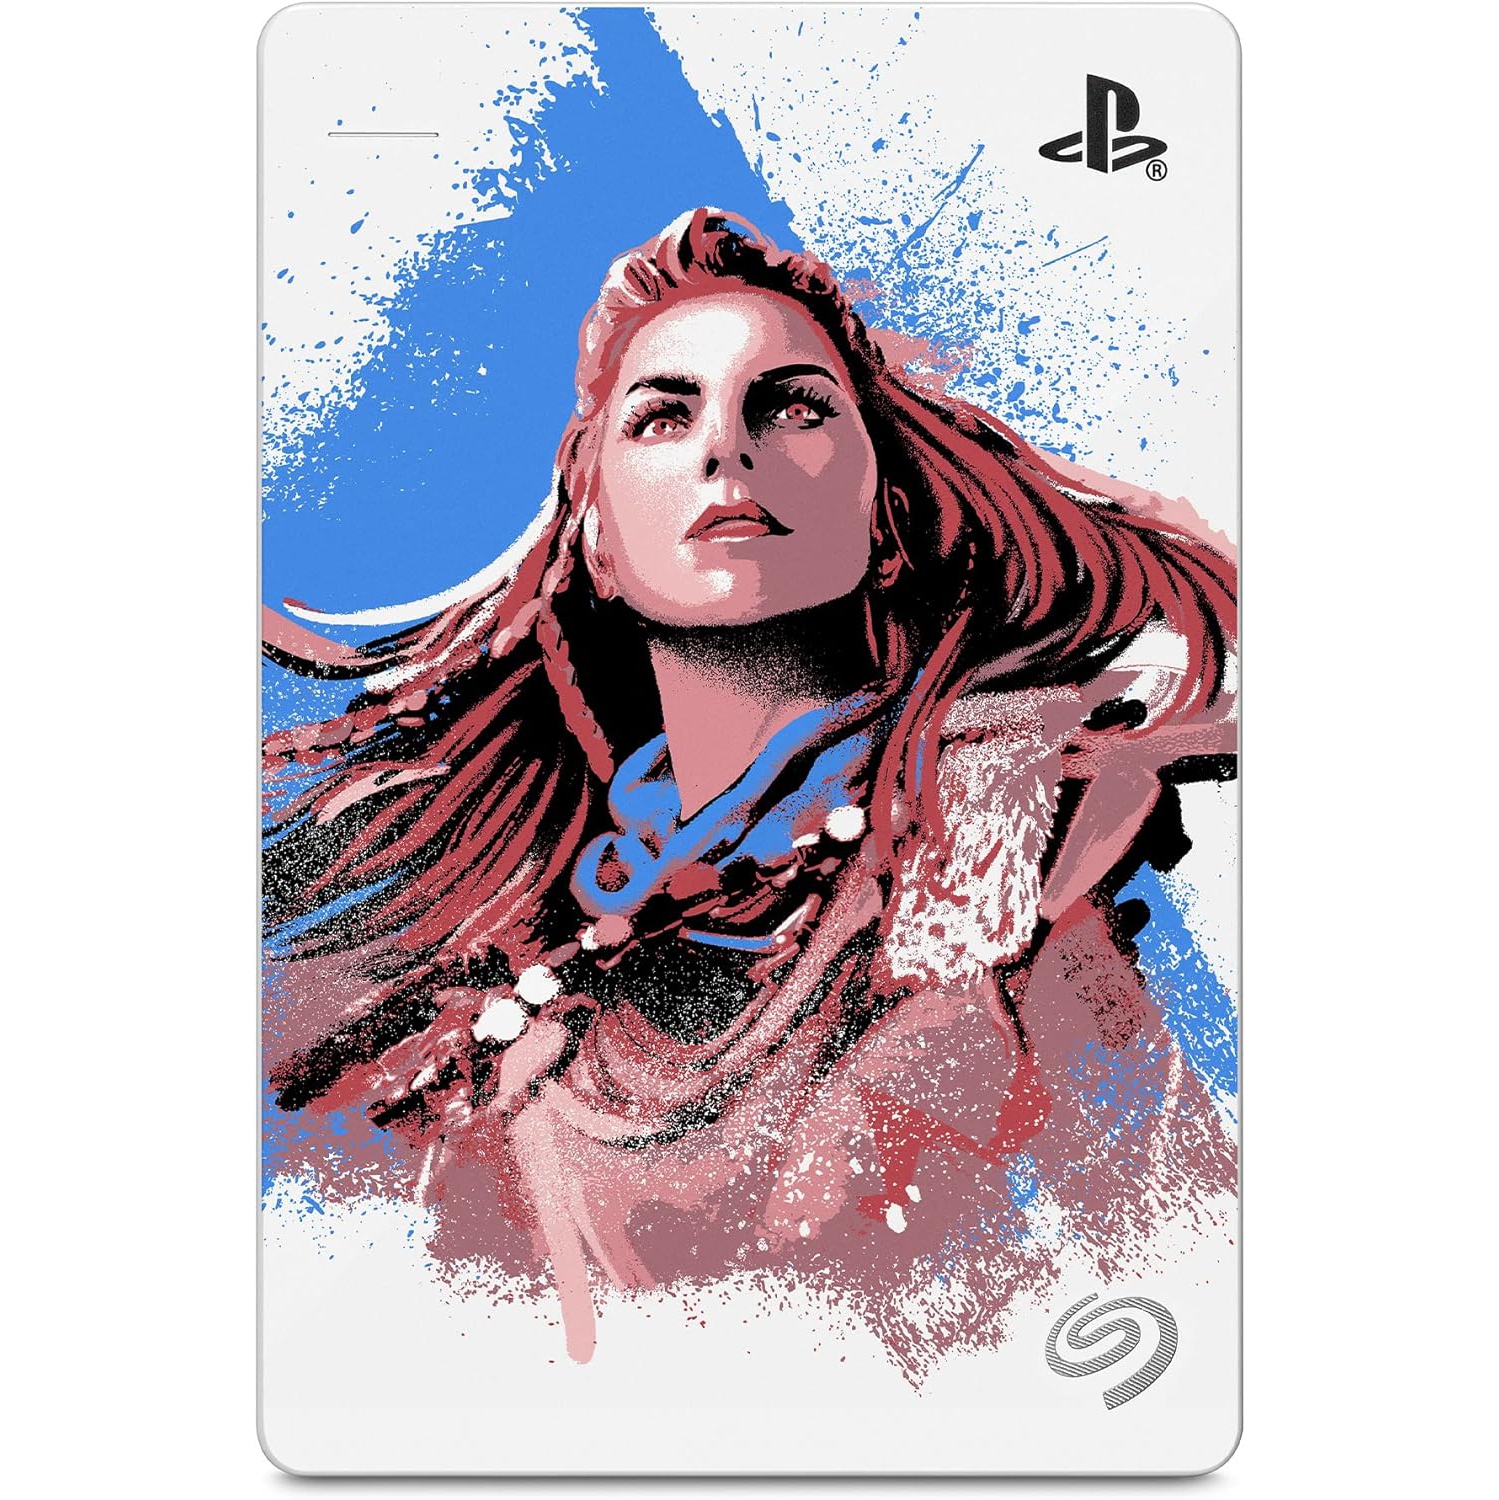 Seagate Horizon Forbidden West Limited Edition Game Drive for Playstation Consoles 2TB External Hard Drive - USB 3.2 Gen1, Officially-Licensed (STLM2000100)